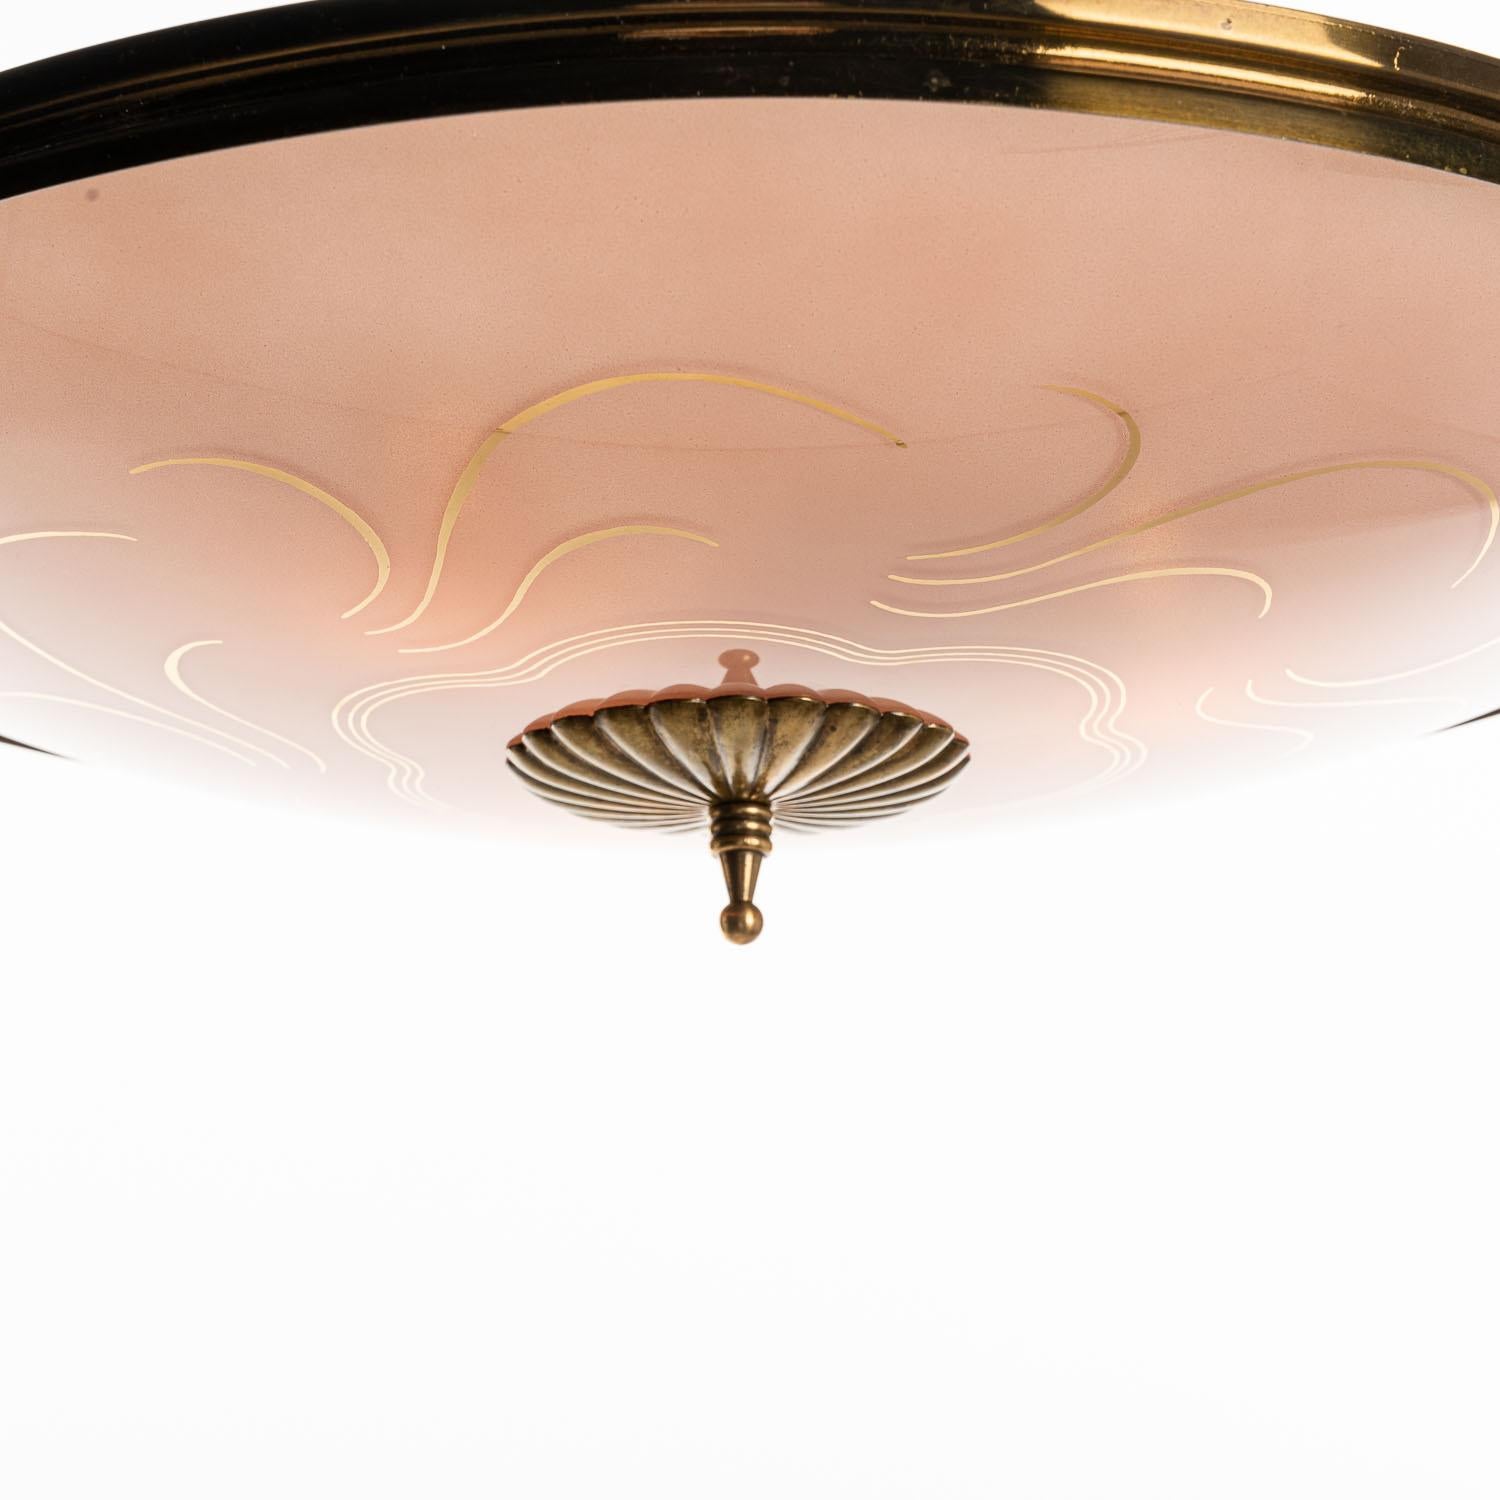 This elegant piece consisting of a brass frame and 2 unique frosted and satin glass reflector/saucers. 
The lower round curved pink-colored glass reflector with gold stripe motifs mounts below a round crystal clear glass reflector. Finished off